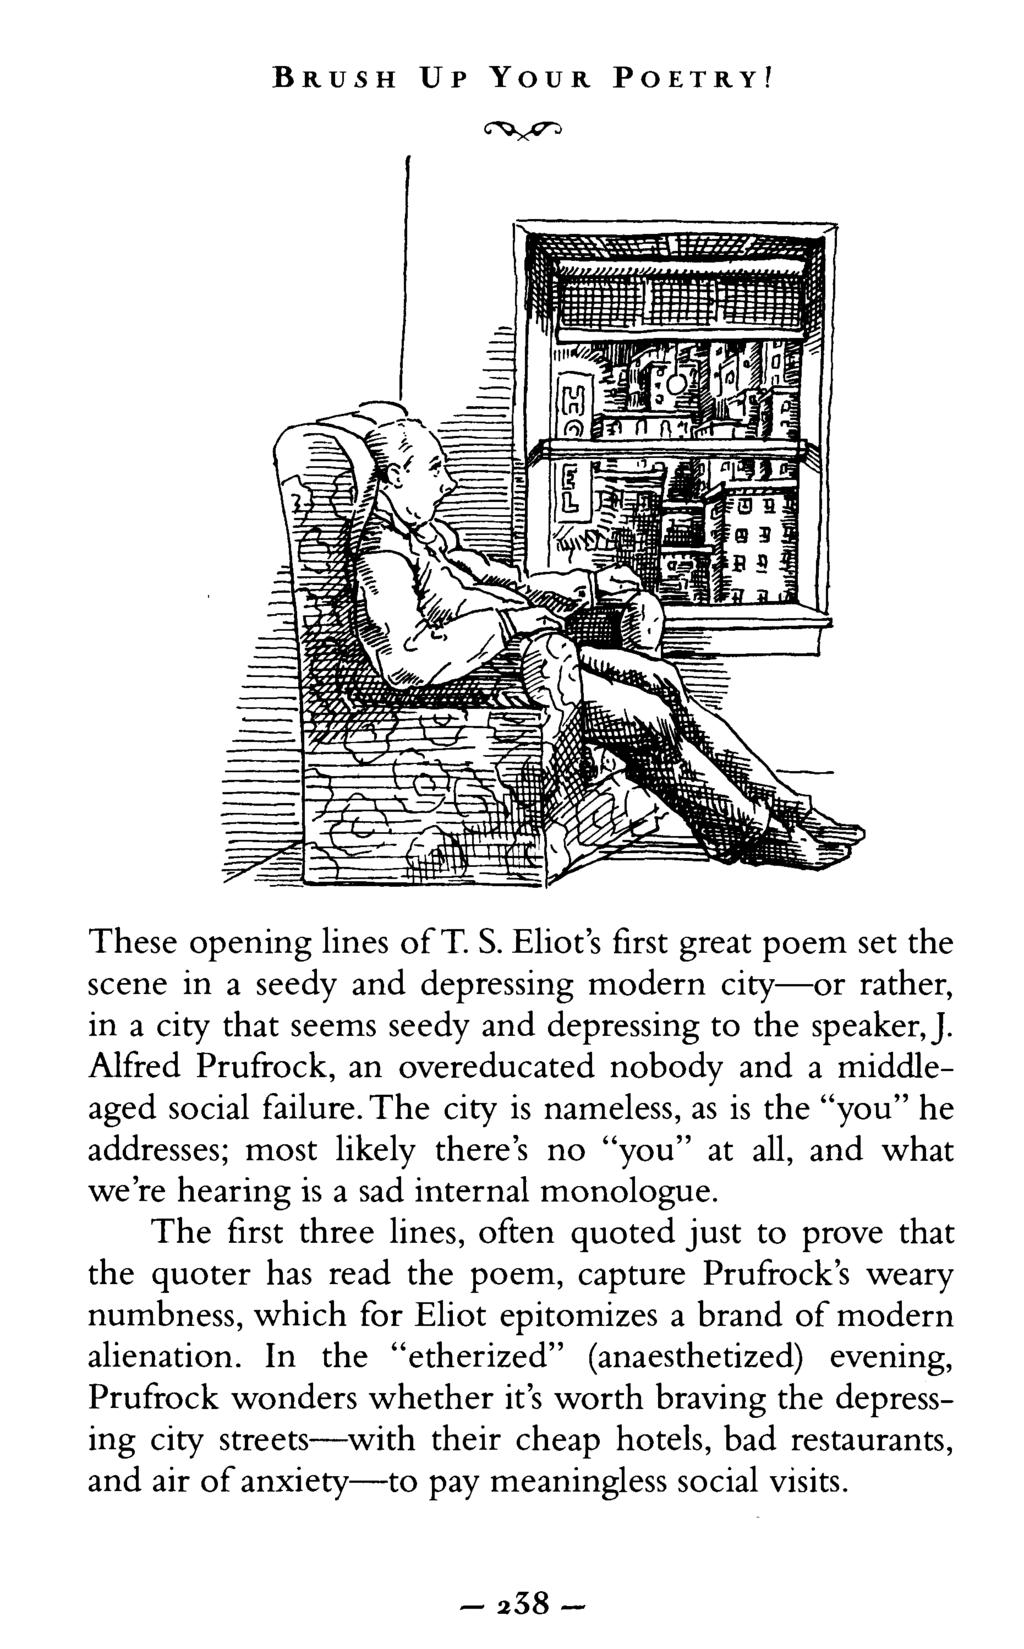 BRUSH UP YOUR POETRY? These opening lines of T. S. Eliot's first great poem set the scene in a seedy and depressing modern city or rather, in a city that seems seedy and depressing to the speaker, J.